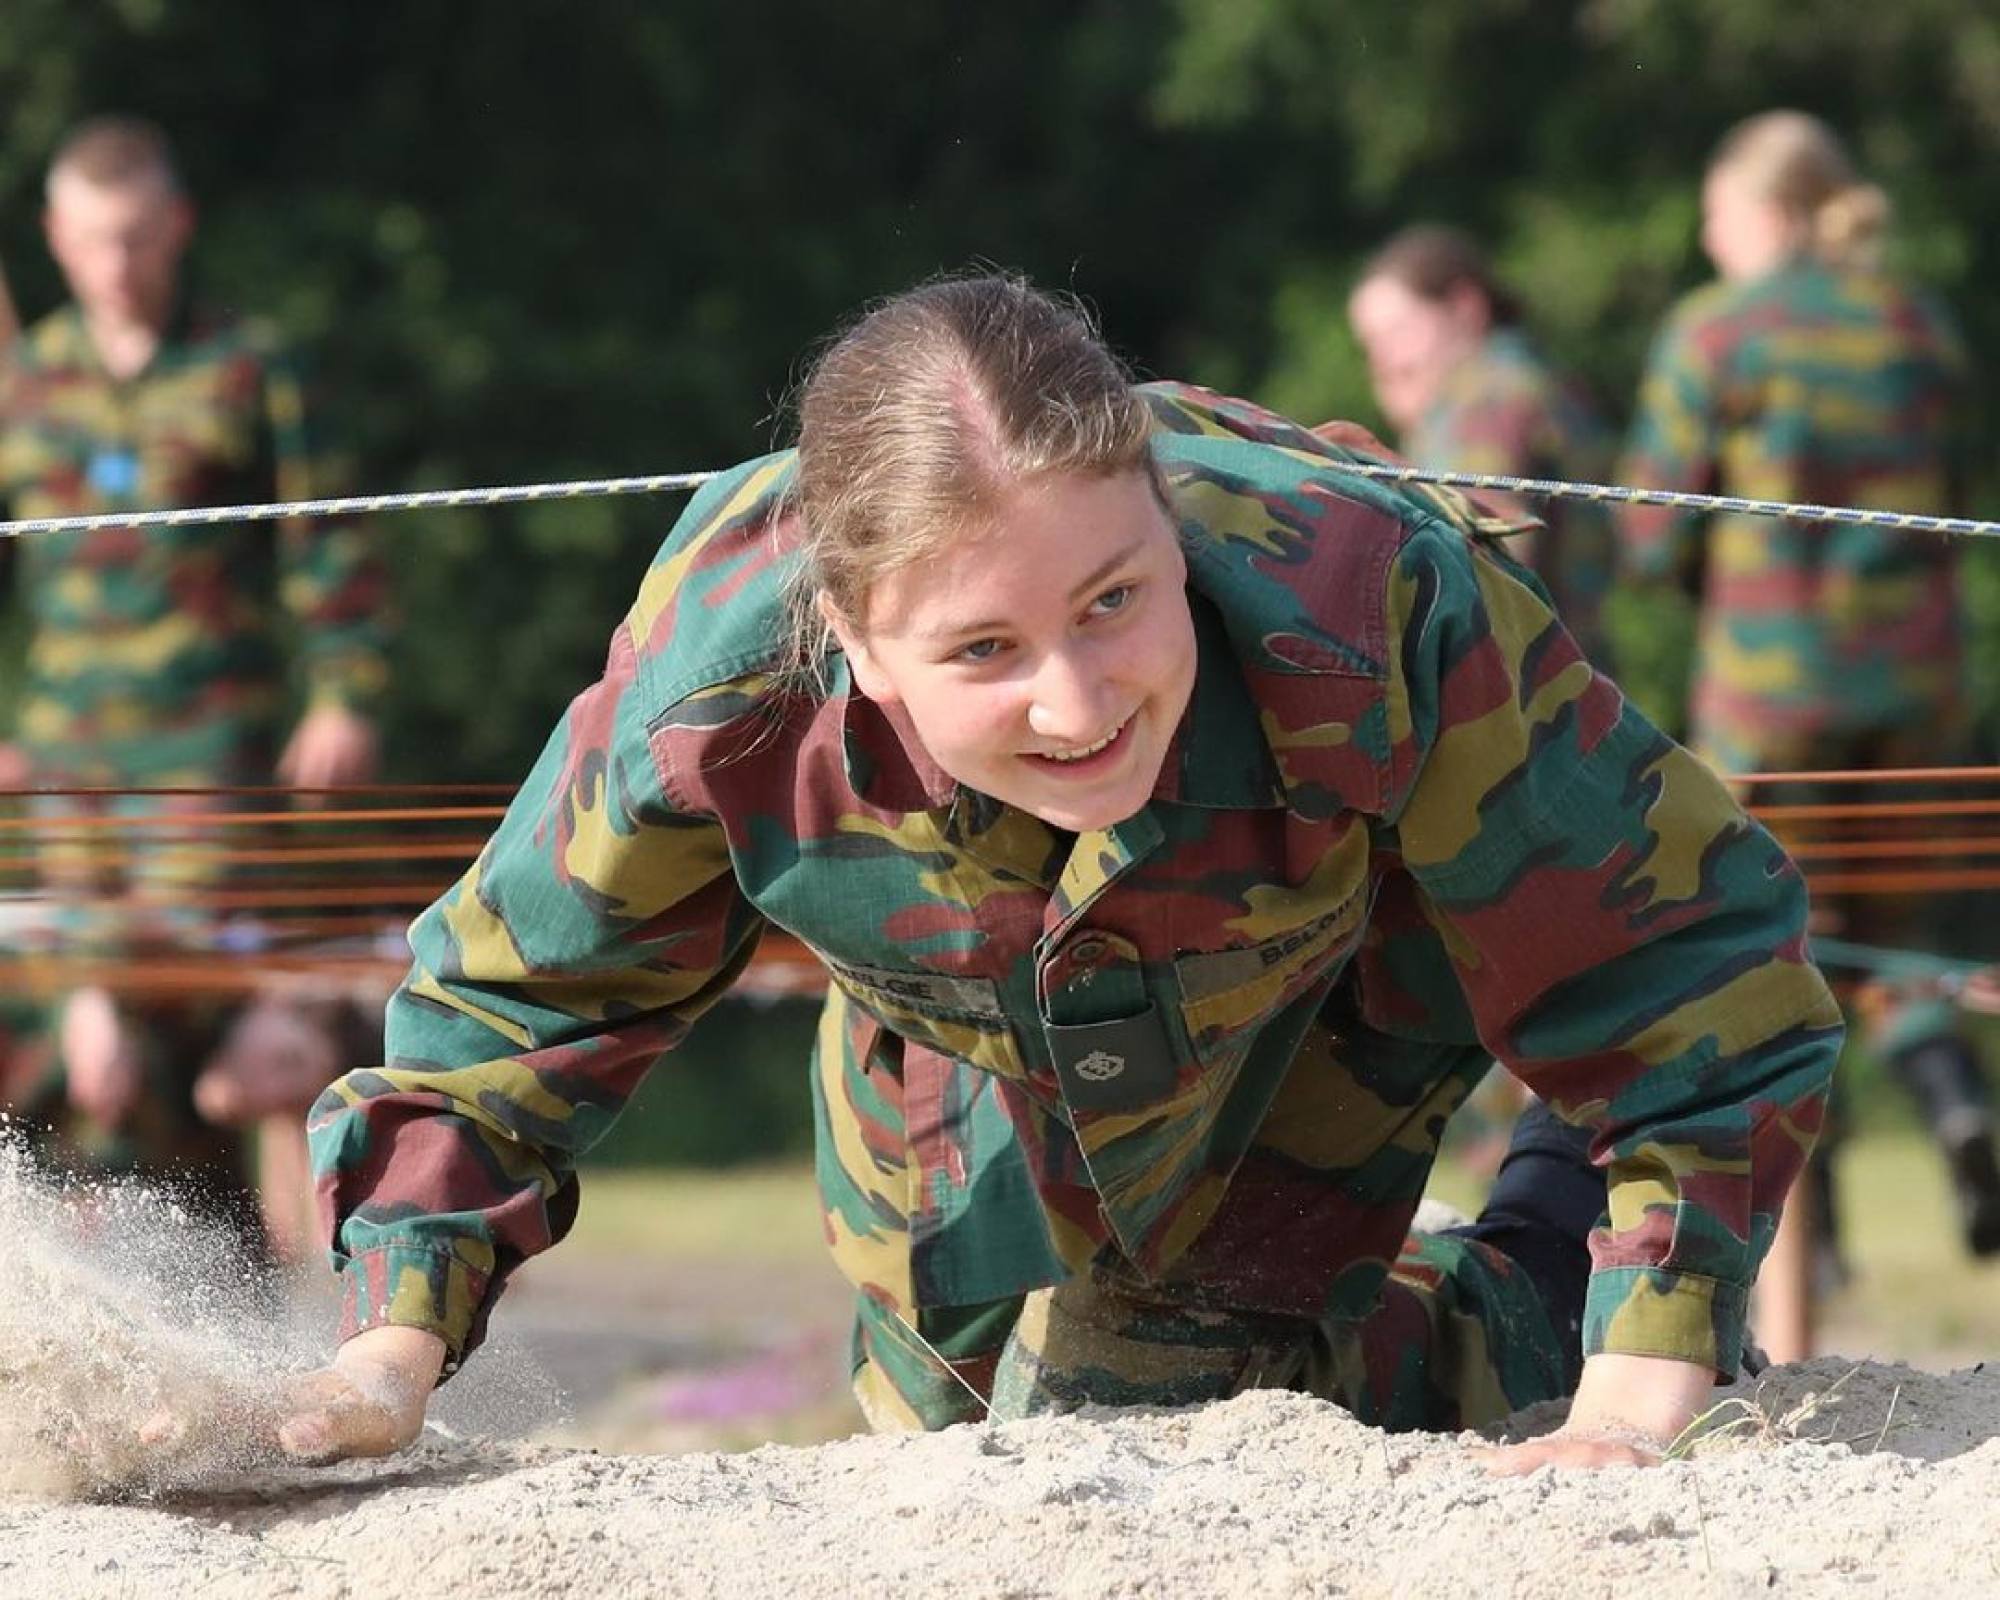 Crown Princess Elisabeth to attend the Royal Military Academy in Brussels